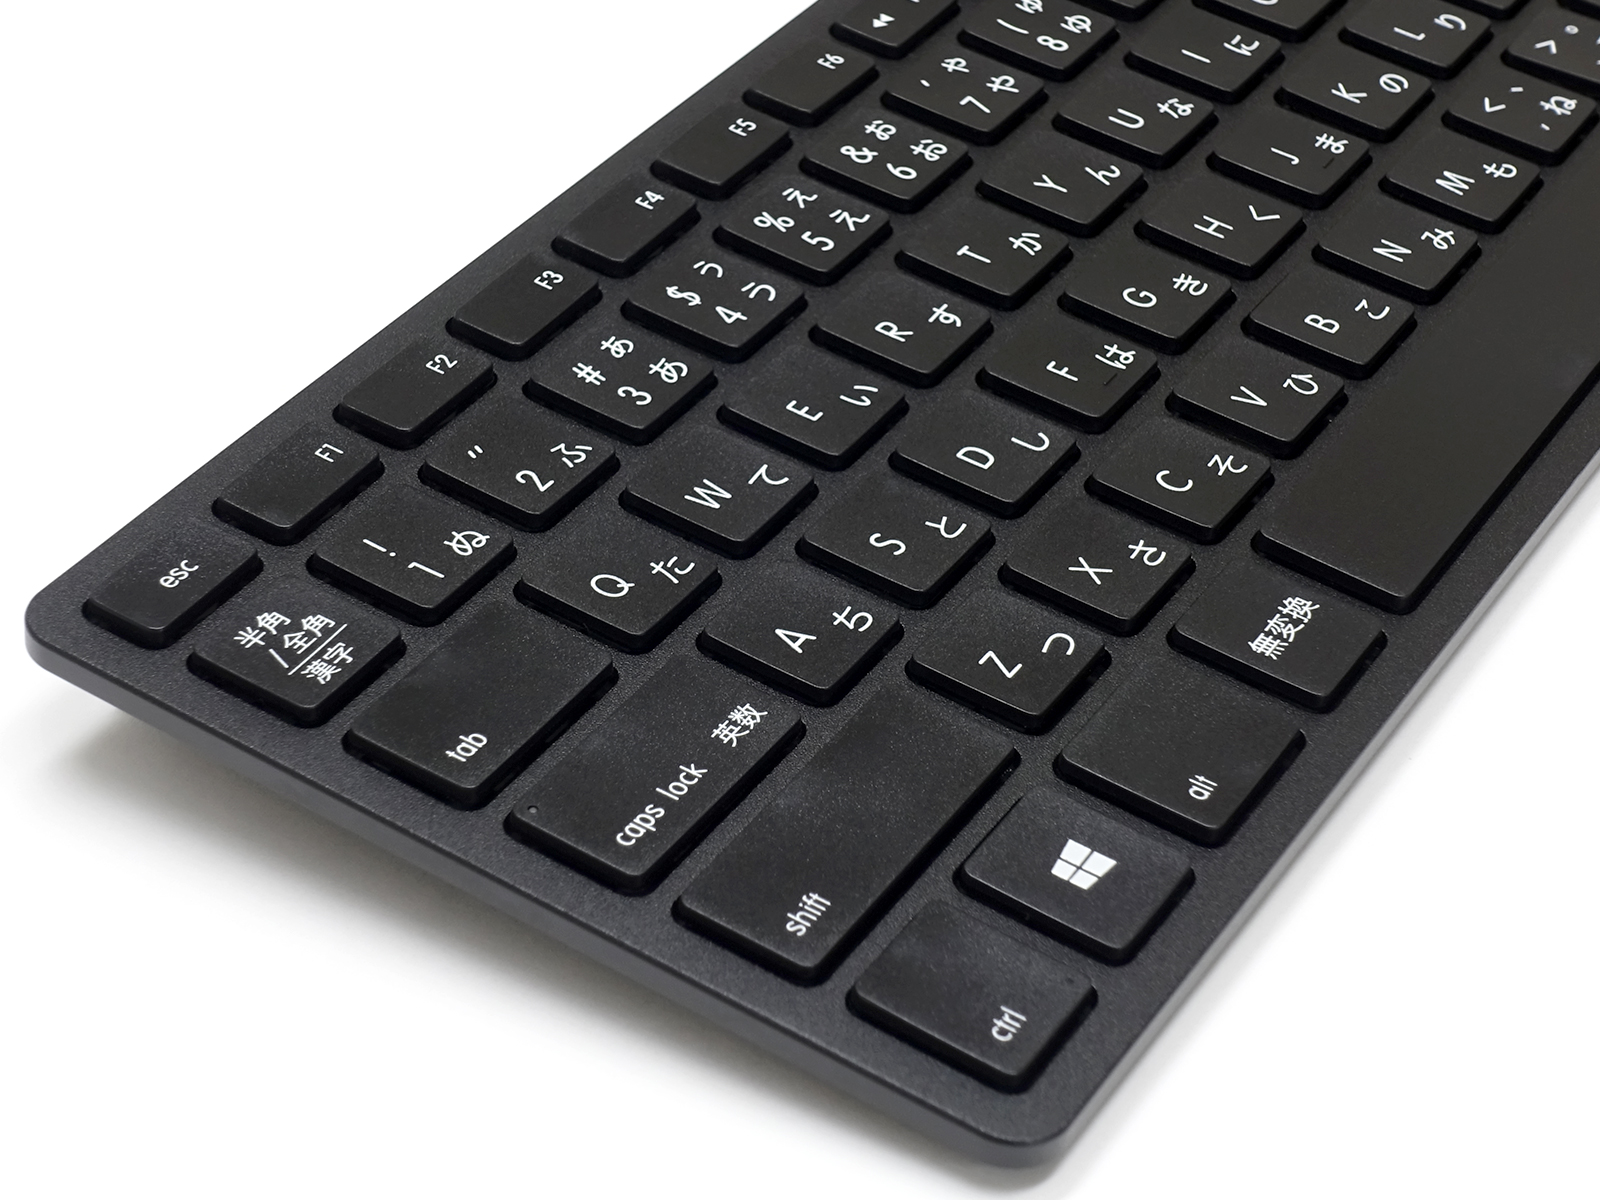 Matias Wired Aluminum Tenkeyless keyboard for PC: image 5 of 6 thumb